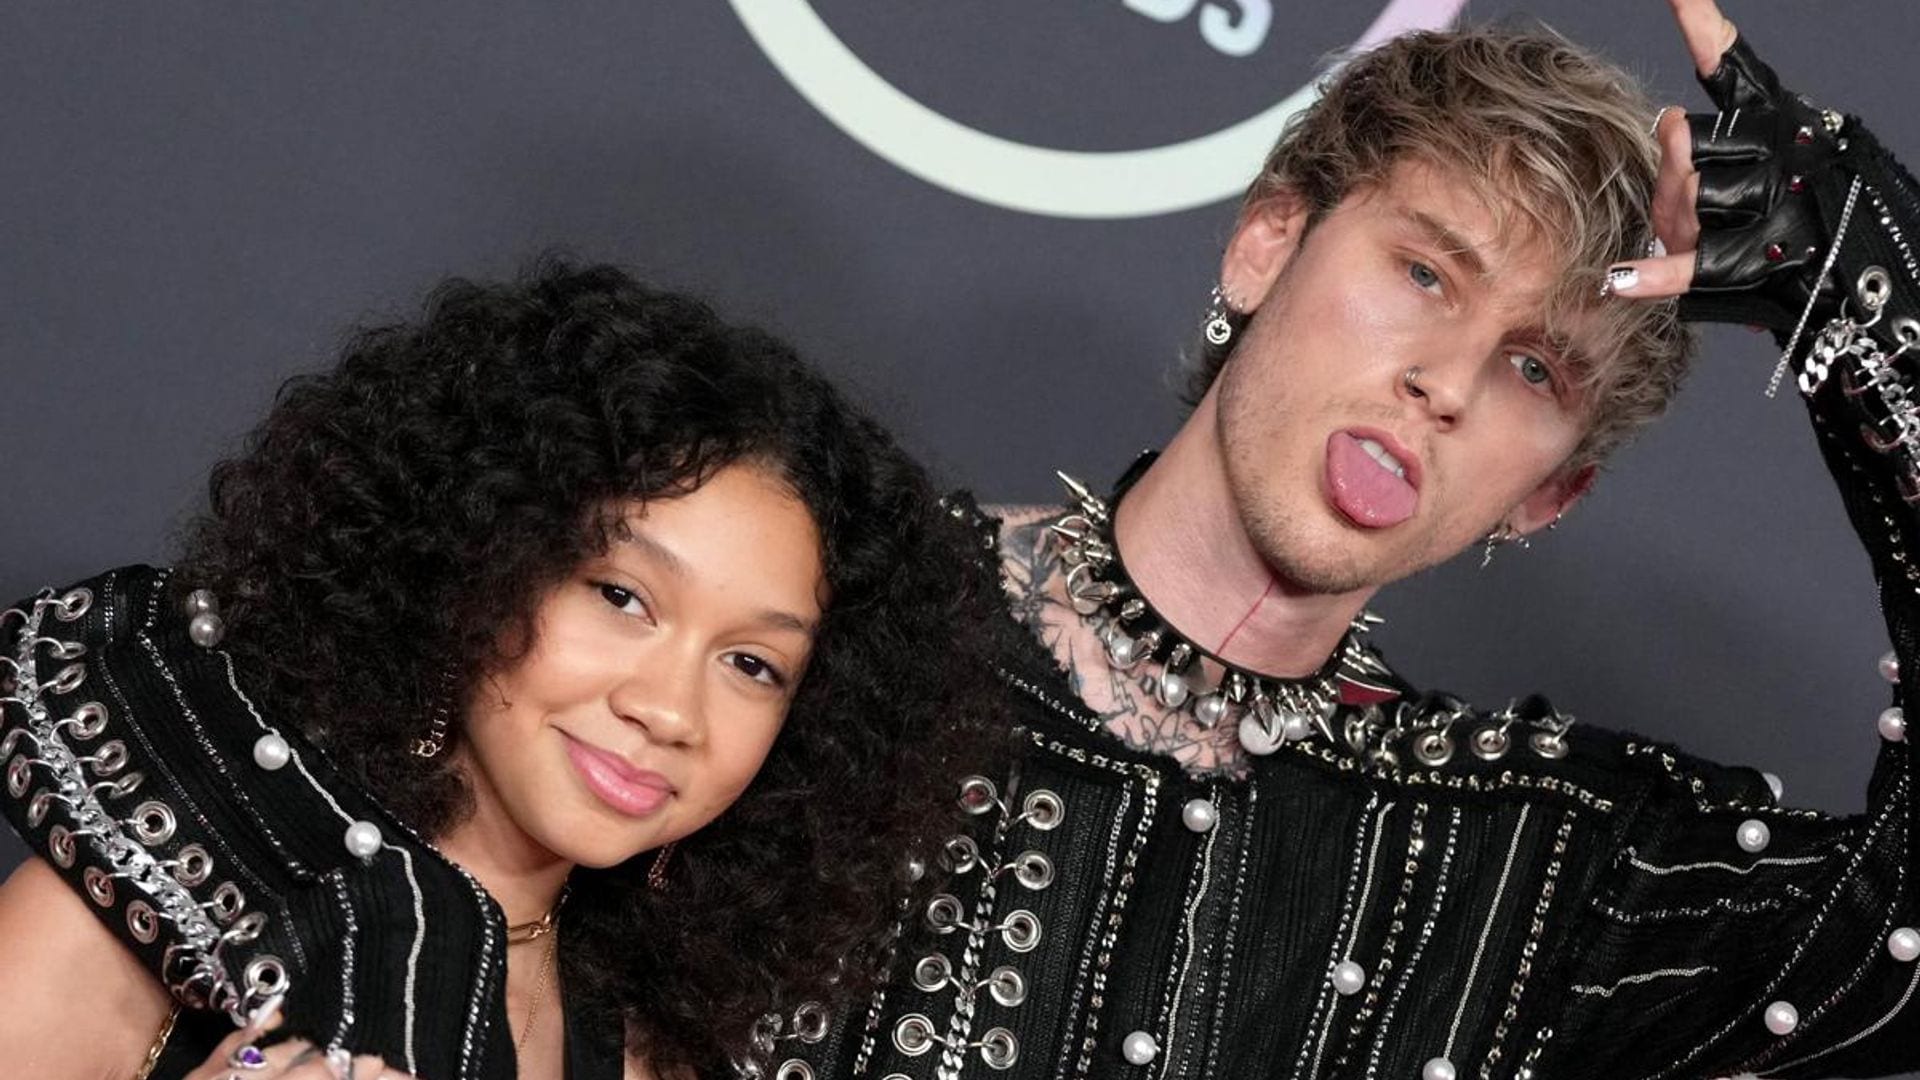 Machine Gun Kelly shows off his parenting skills after cutting himself with a glass